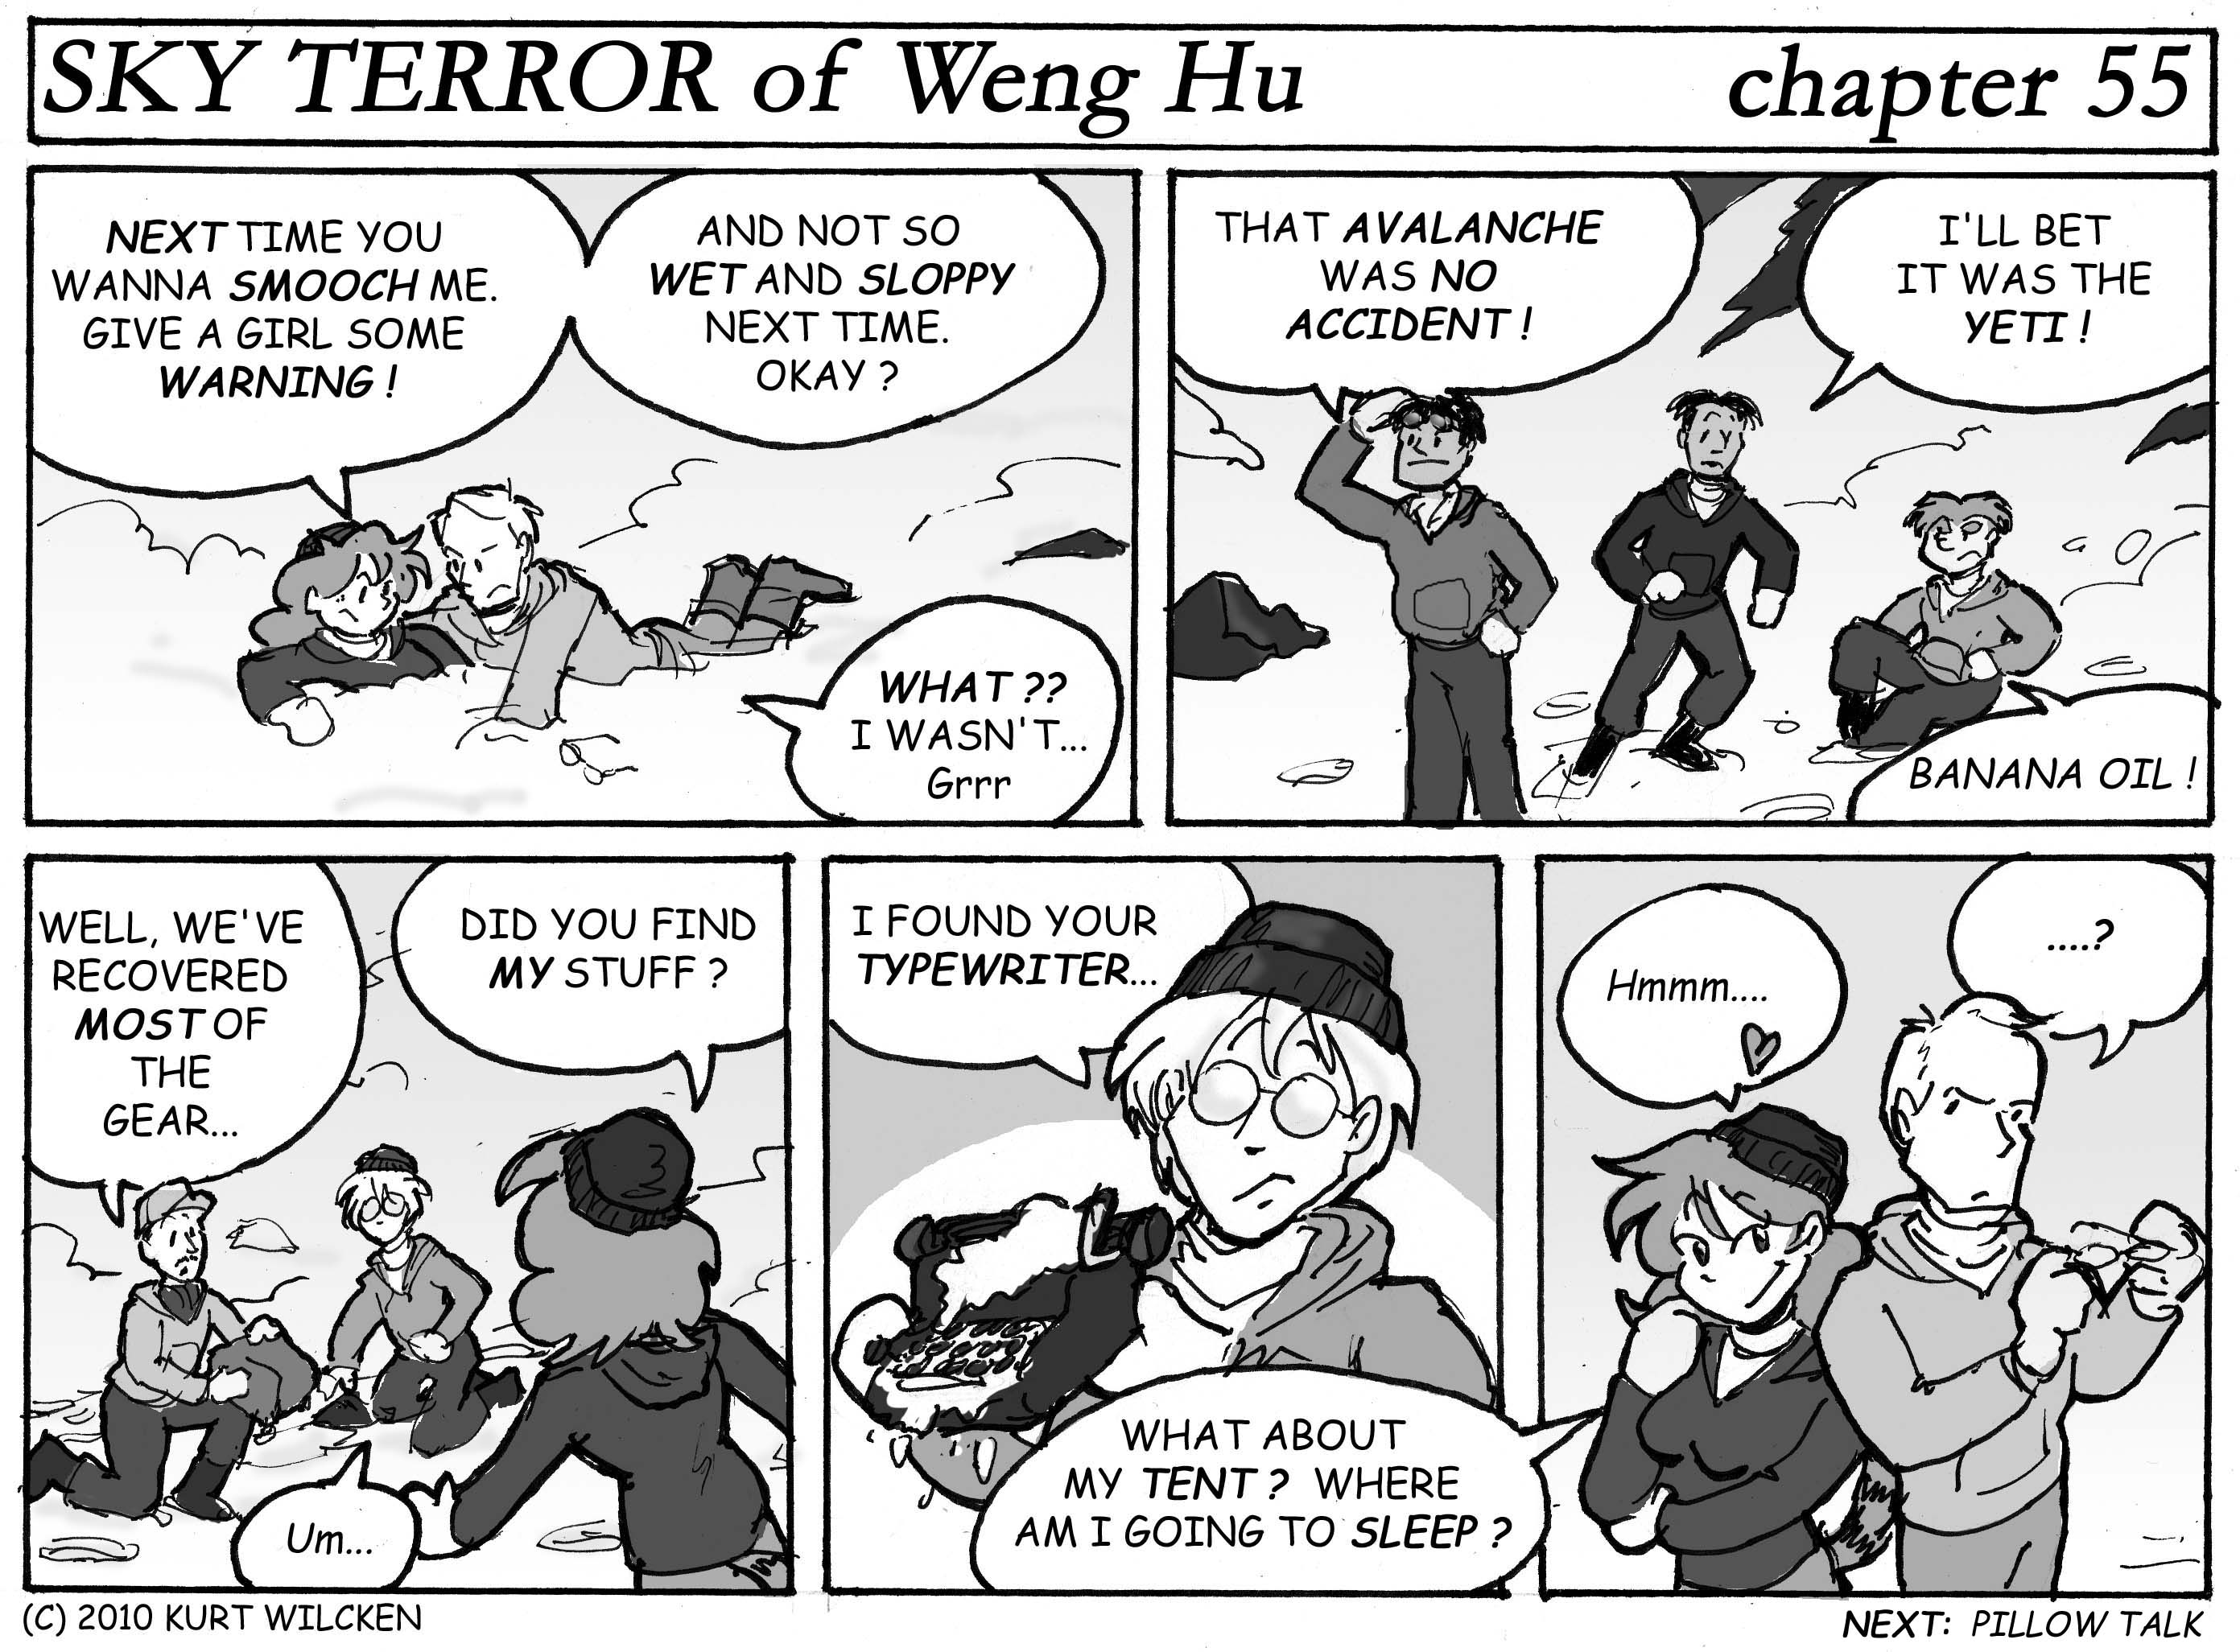 SKY TERROR of Weng Hu:  Chapter 55 — The Tent and the Typewriter